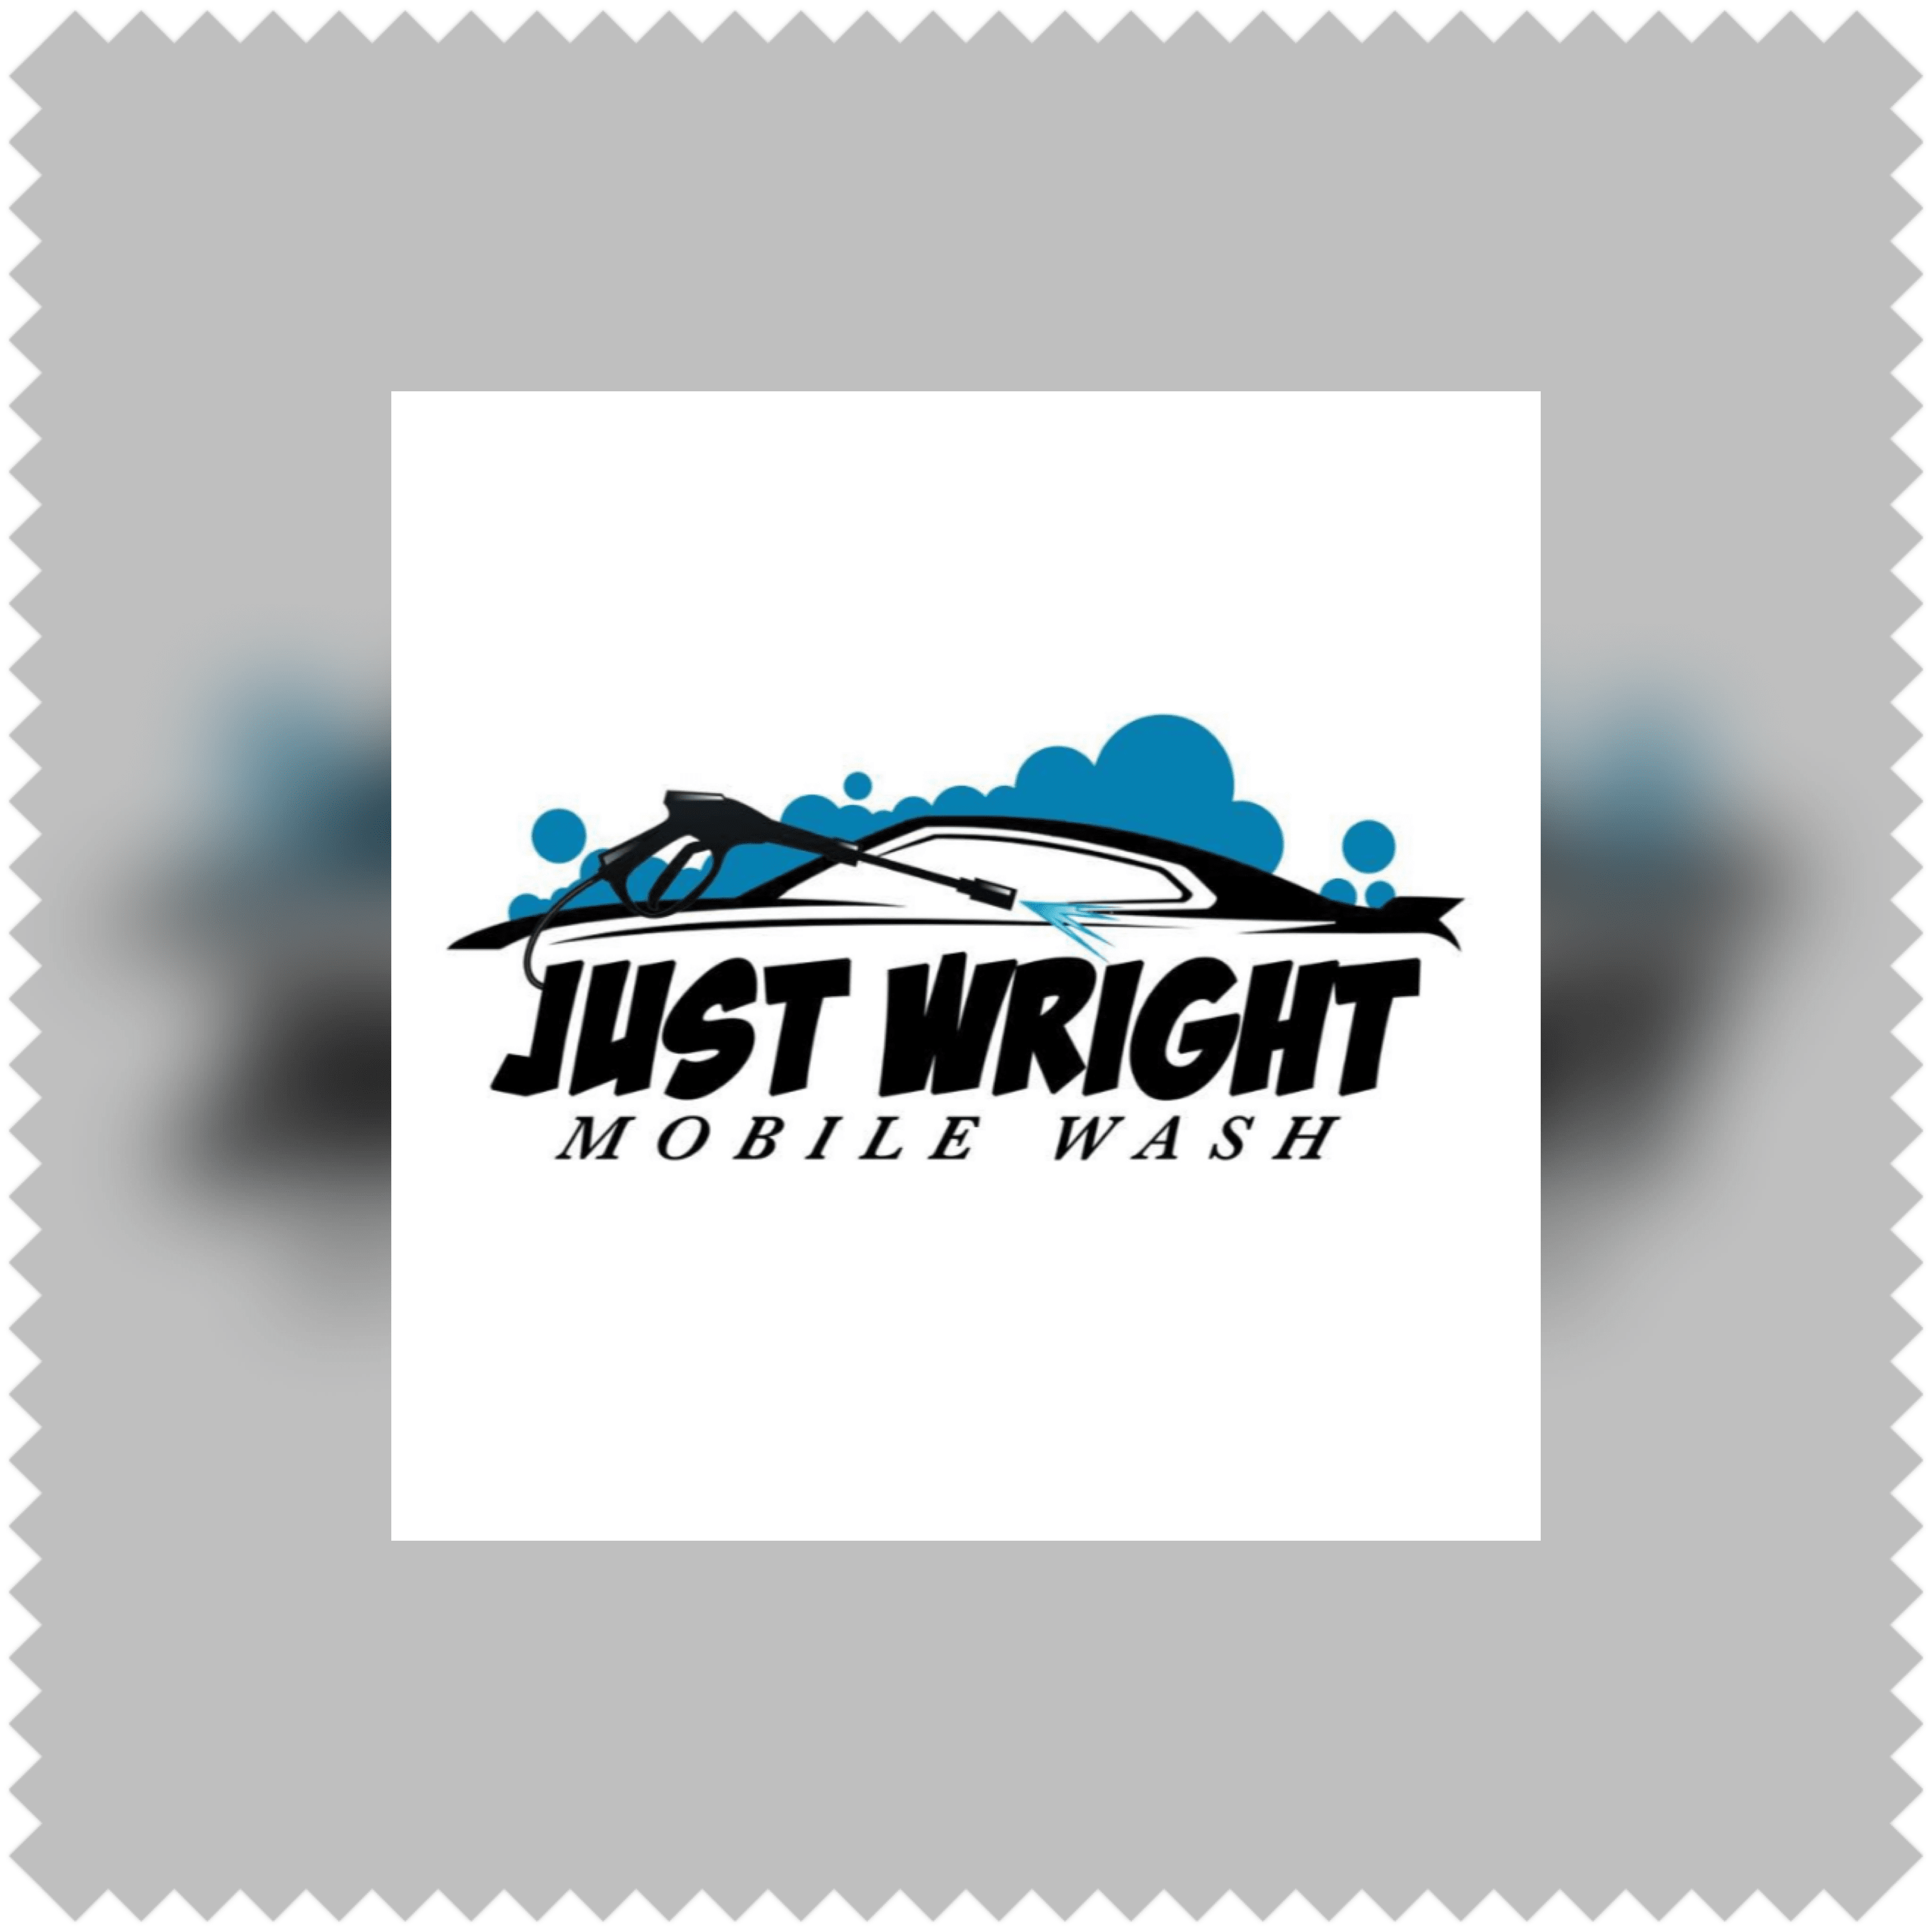 Just Wright Mobile